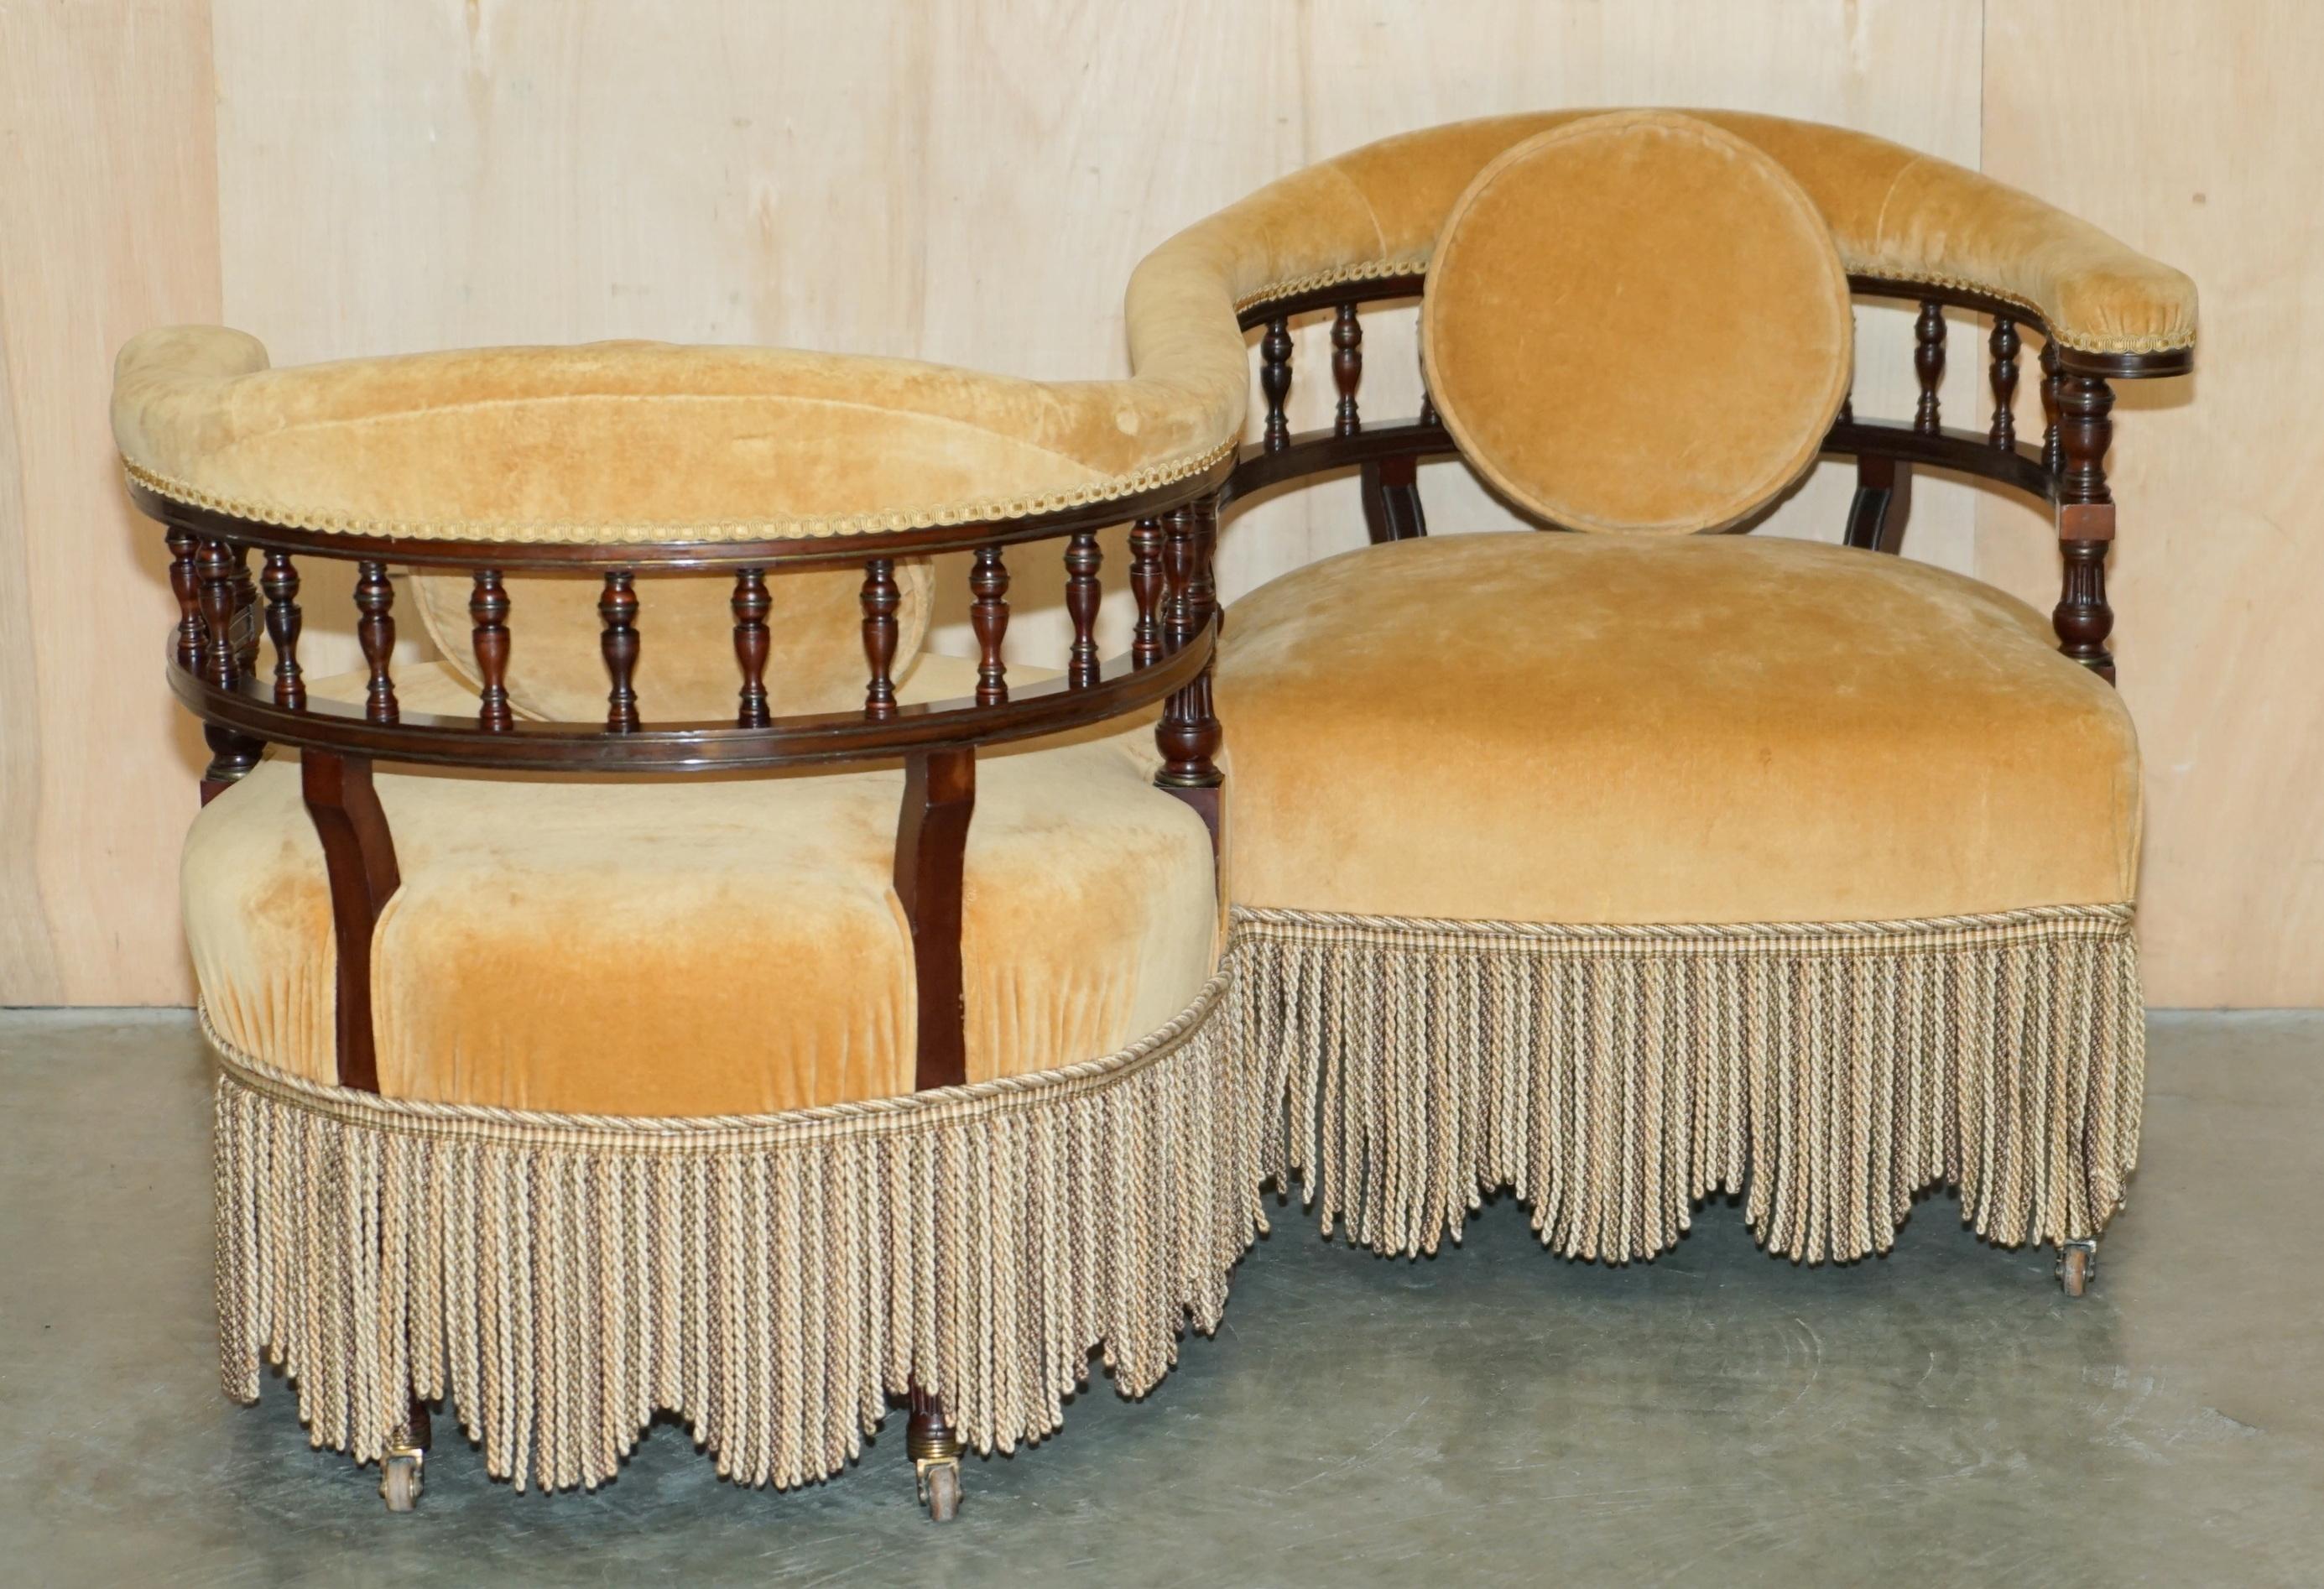 Royal House Antiques

Royal House Antiques is delighted to offer for sale lovely Victorian Aesthetic Movement “Tete a Tete” Conversation couch

Please note the delivery fee listed is just a guide, it covers within the M25 only for the UK and local